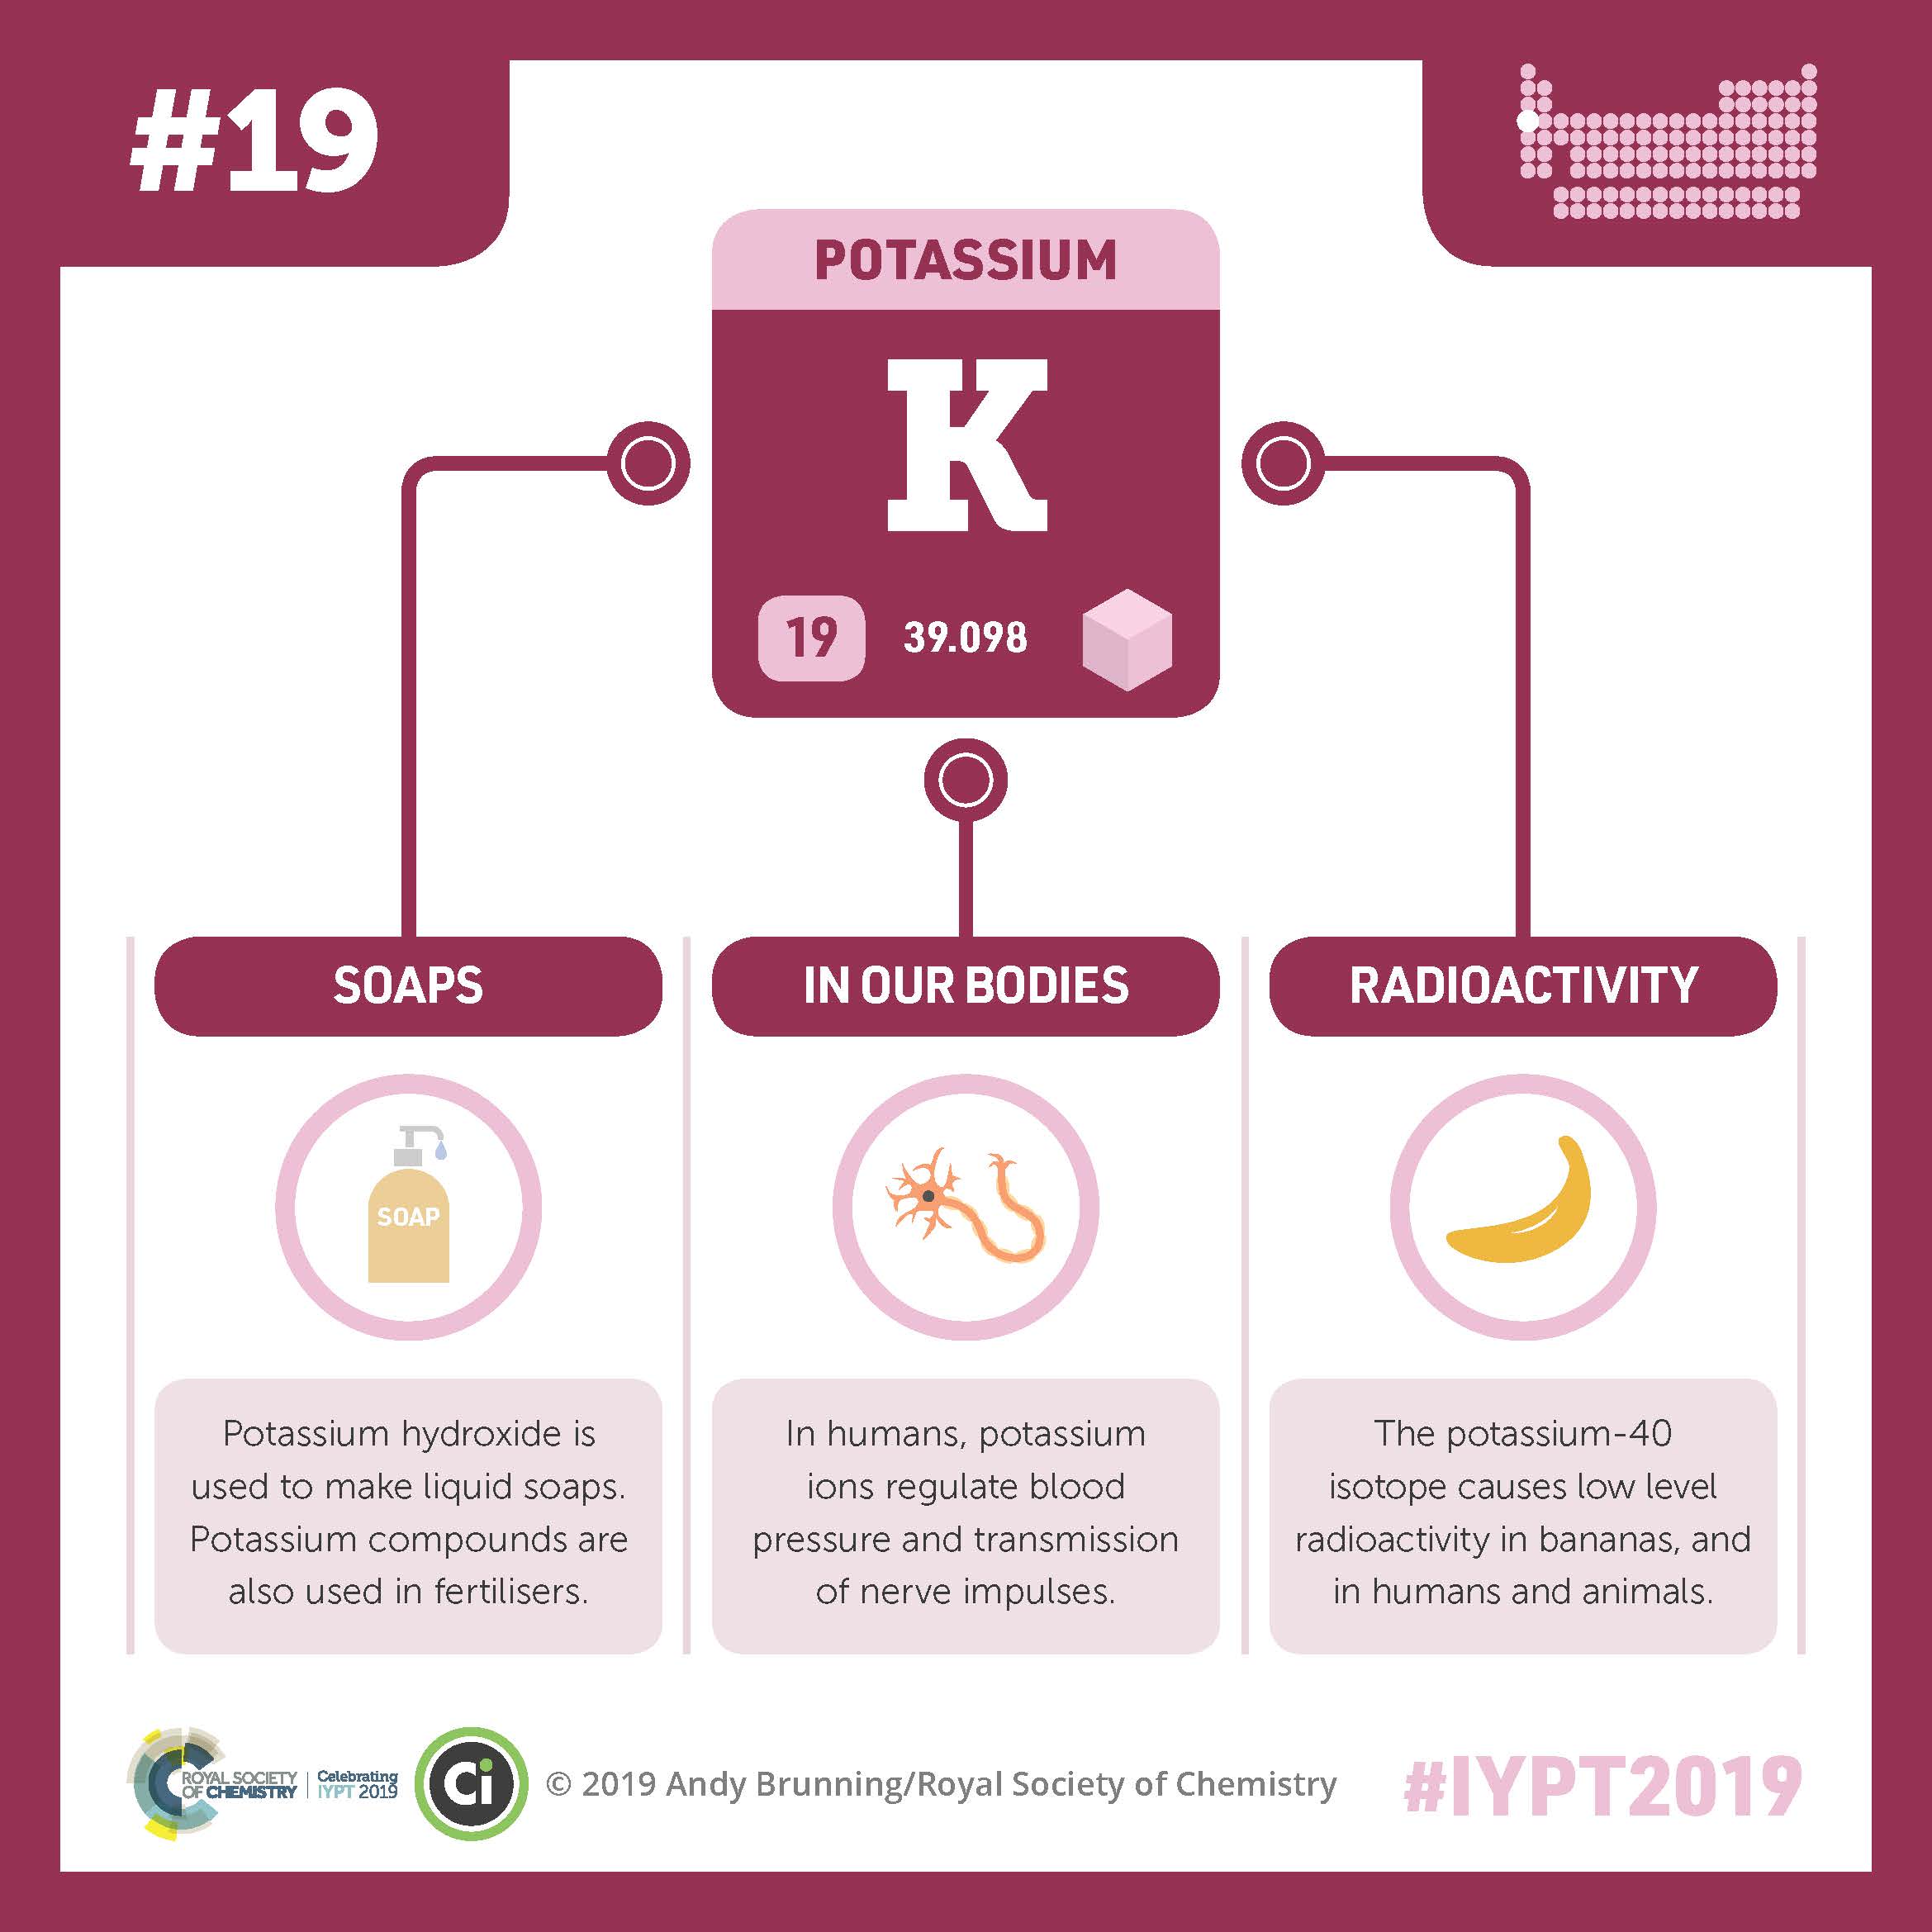 A graphic showing potassium’s symbol K, atomic number 19, and atomic weight 39.098 connected by lines to illustrations of soap, a nerve cell, and a banana. Potassium hydroxide is used to make liquid soaps. Potassium compounds are also used in fertilizers. In humans, potassium ions regulate blood pressure and transmission of nerve impulses. The potassium-40 isotope causes low level radioactivity in bananas and in humans and animals. Across the bottom of the graphic is the logo for the Royal Society of Chemistry celebrating IYPT 2019, the Compound Interest logo, and #IYPT2019.